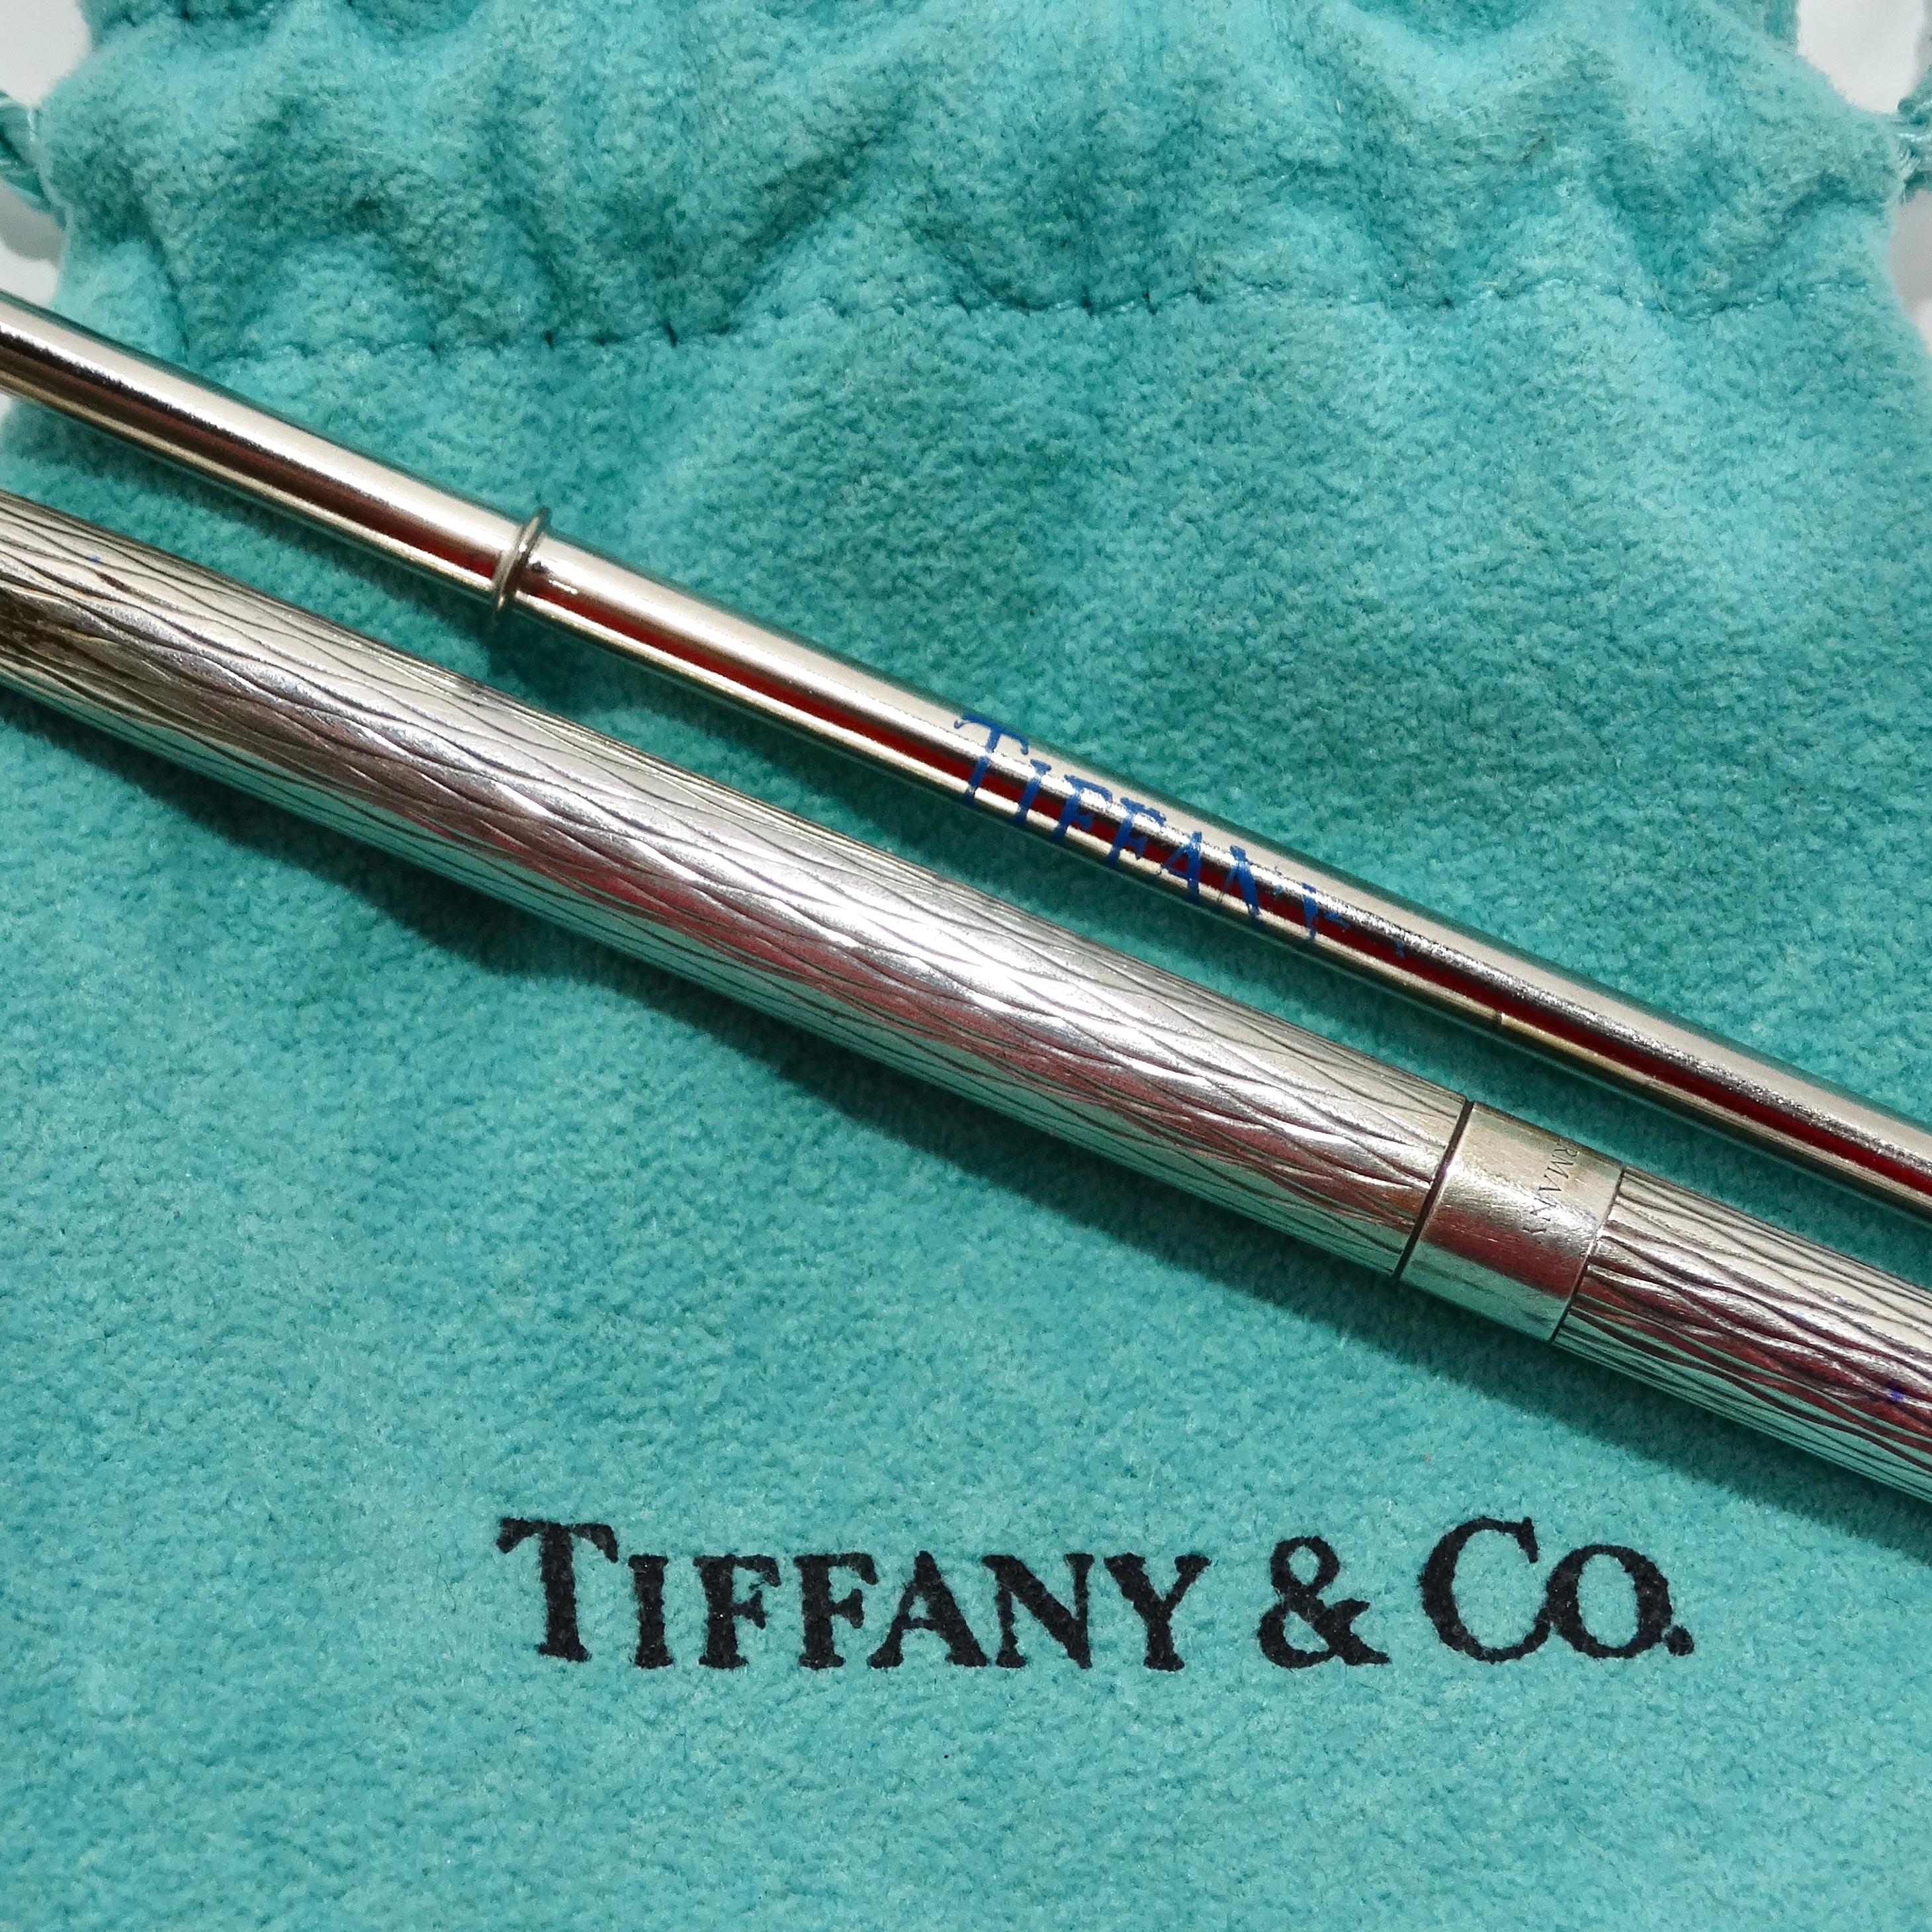 Introducing the exquisite Tiffany & Co 1950s Pure Silver Pen & Ink Set, a timeless and luxurious addition to any desk or workspace. Crafted from pure silver, this vintage Tiffany & Co pen showcases a sophisticated geometric etched design, adding an